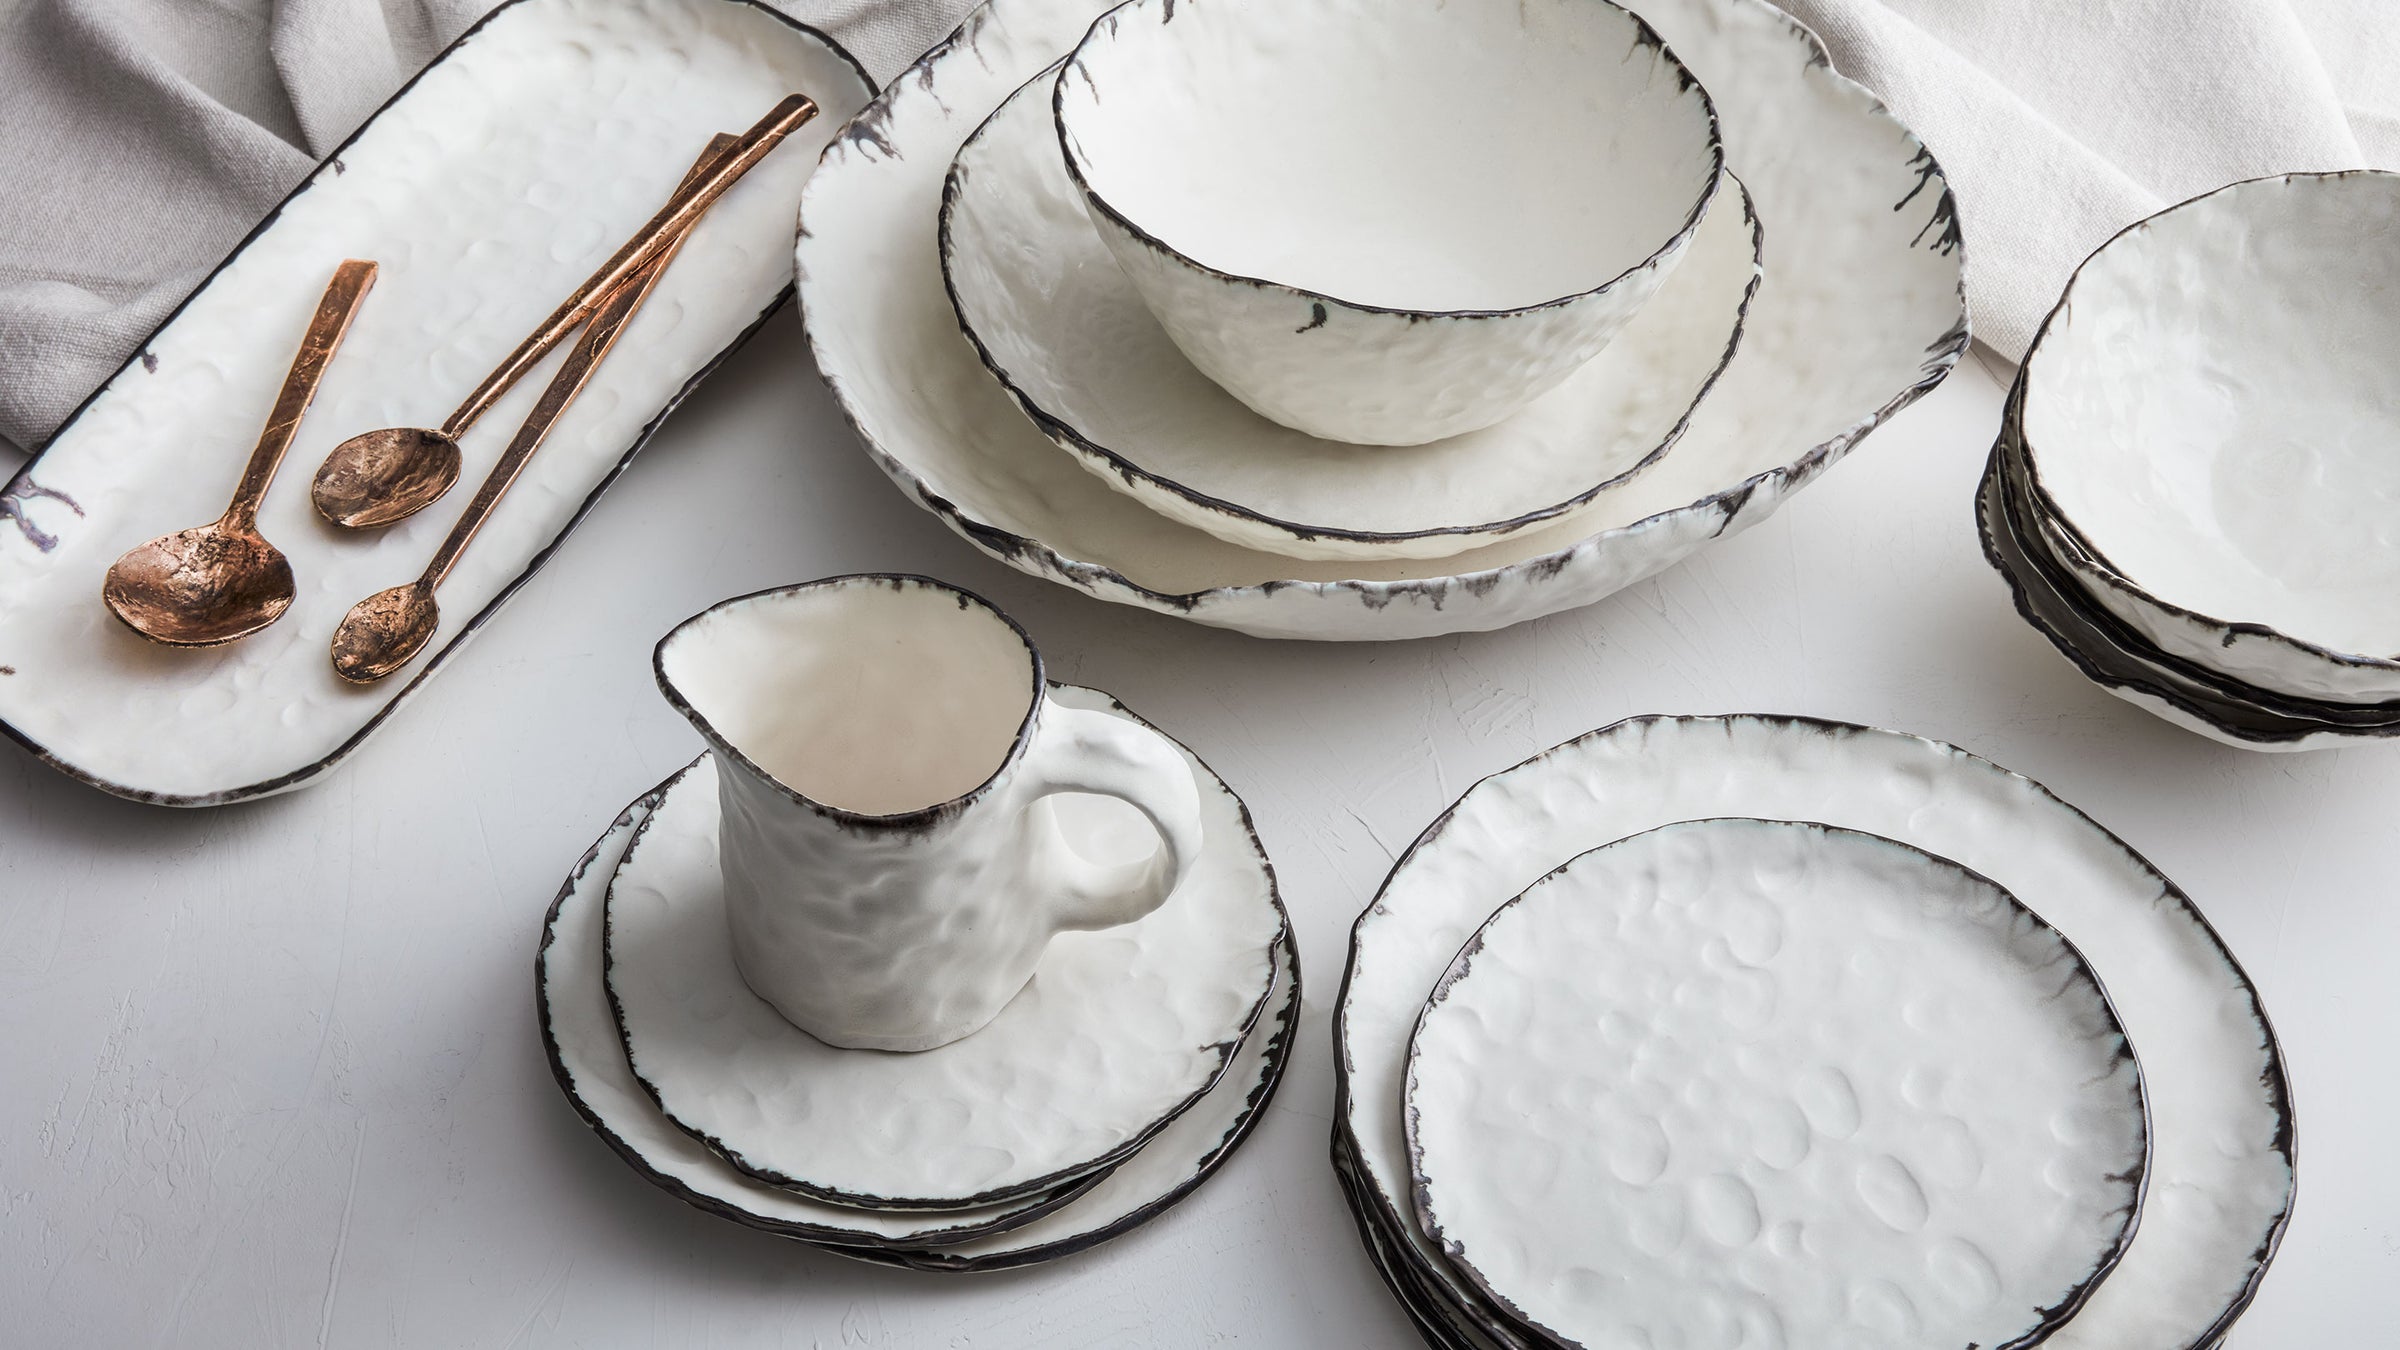 dbo home artisan porcelain textured pinch plates, bowls, trays and pitcher on a white linen tablecloth with bronze cast serving spoons